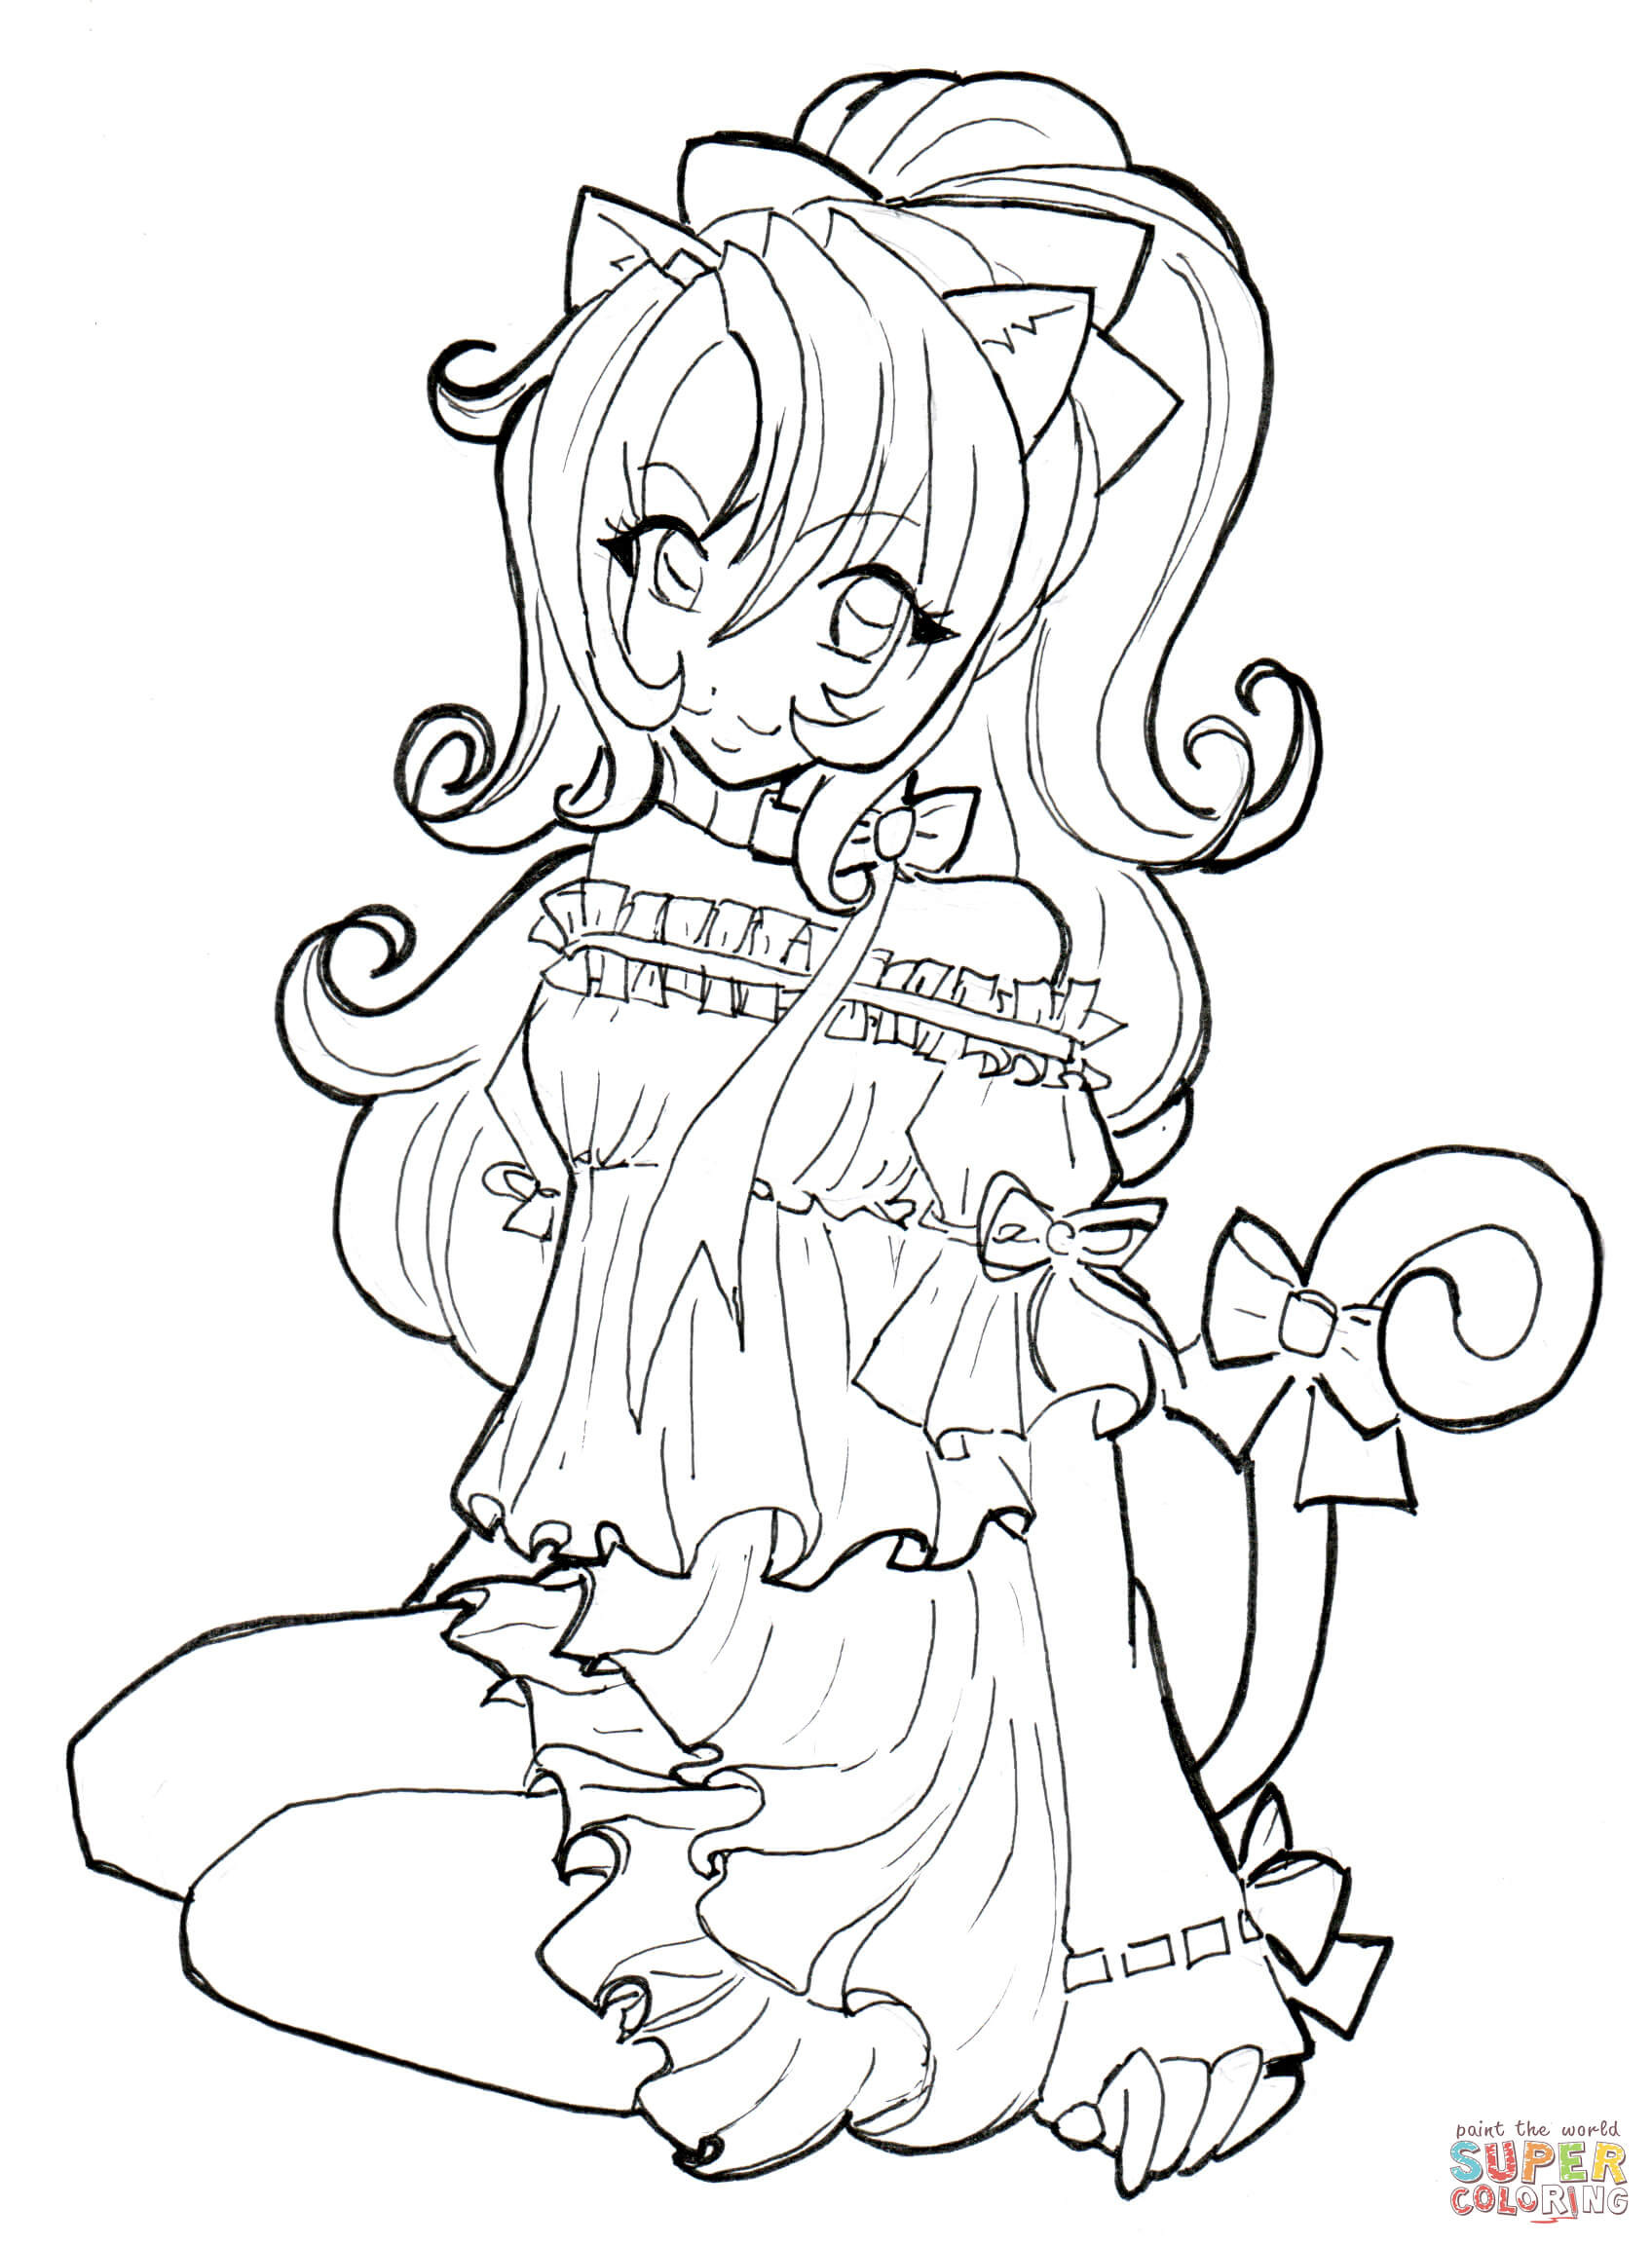 Kawaii Cat Girl Coloring Pages
 Cat Girl coloring page